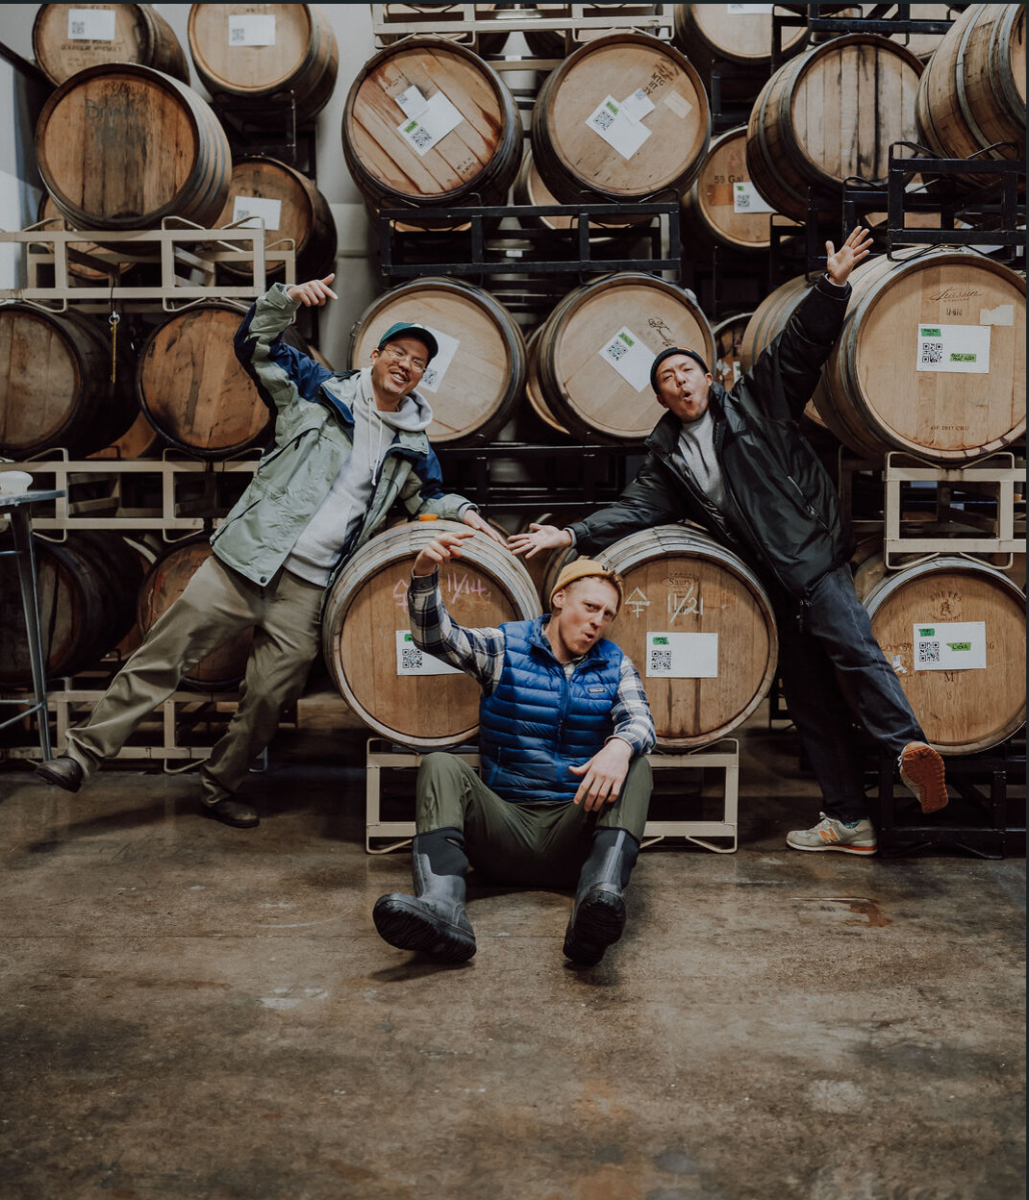 Photo contributed by 2 Towns media team: Kota Ozawa (right), Dave Takush (middle) and Takuro Ikeuchi
(left) pose in front of tap barrels.